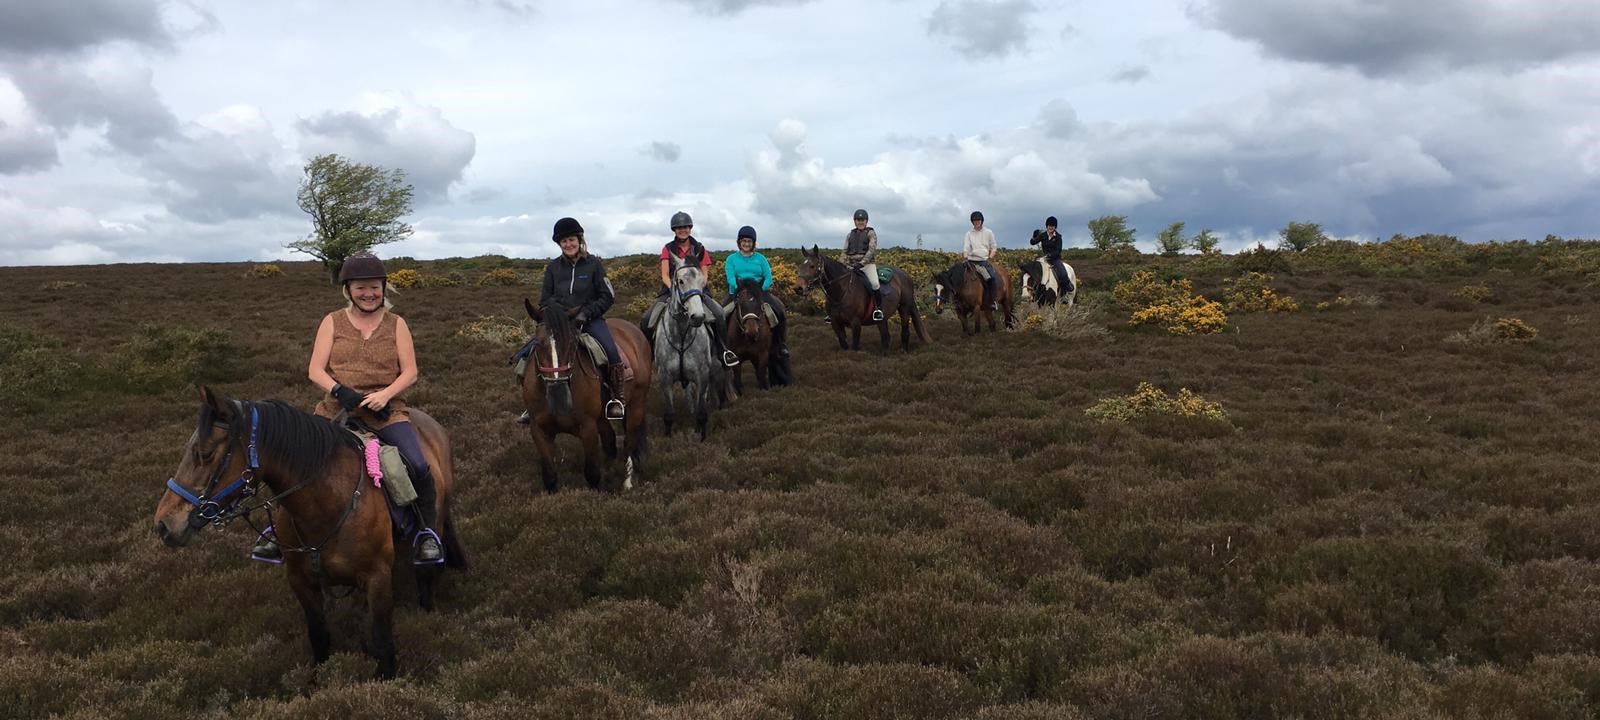 Horse Riding Weekend for Beginners, Intermediates and Experienced Riders